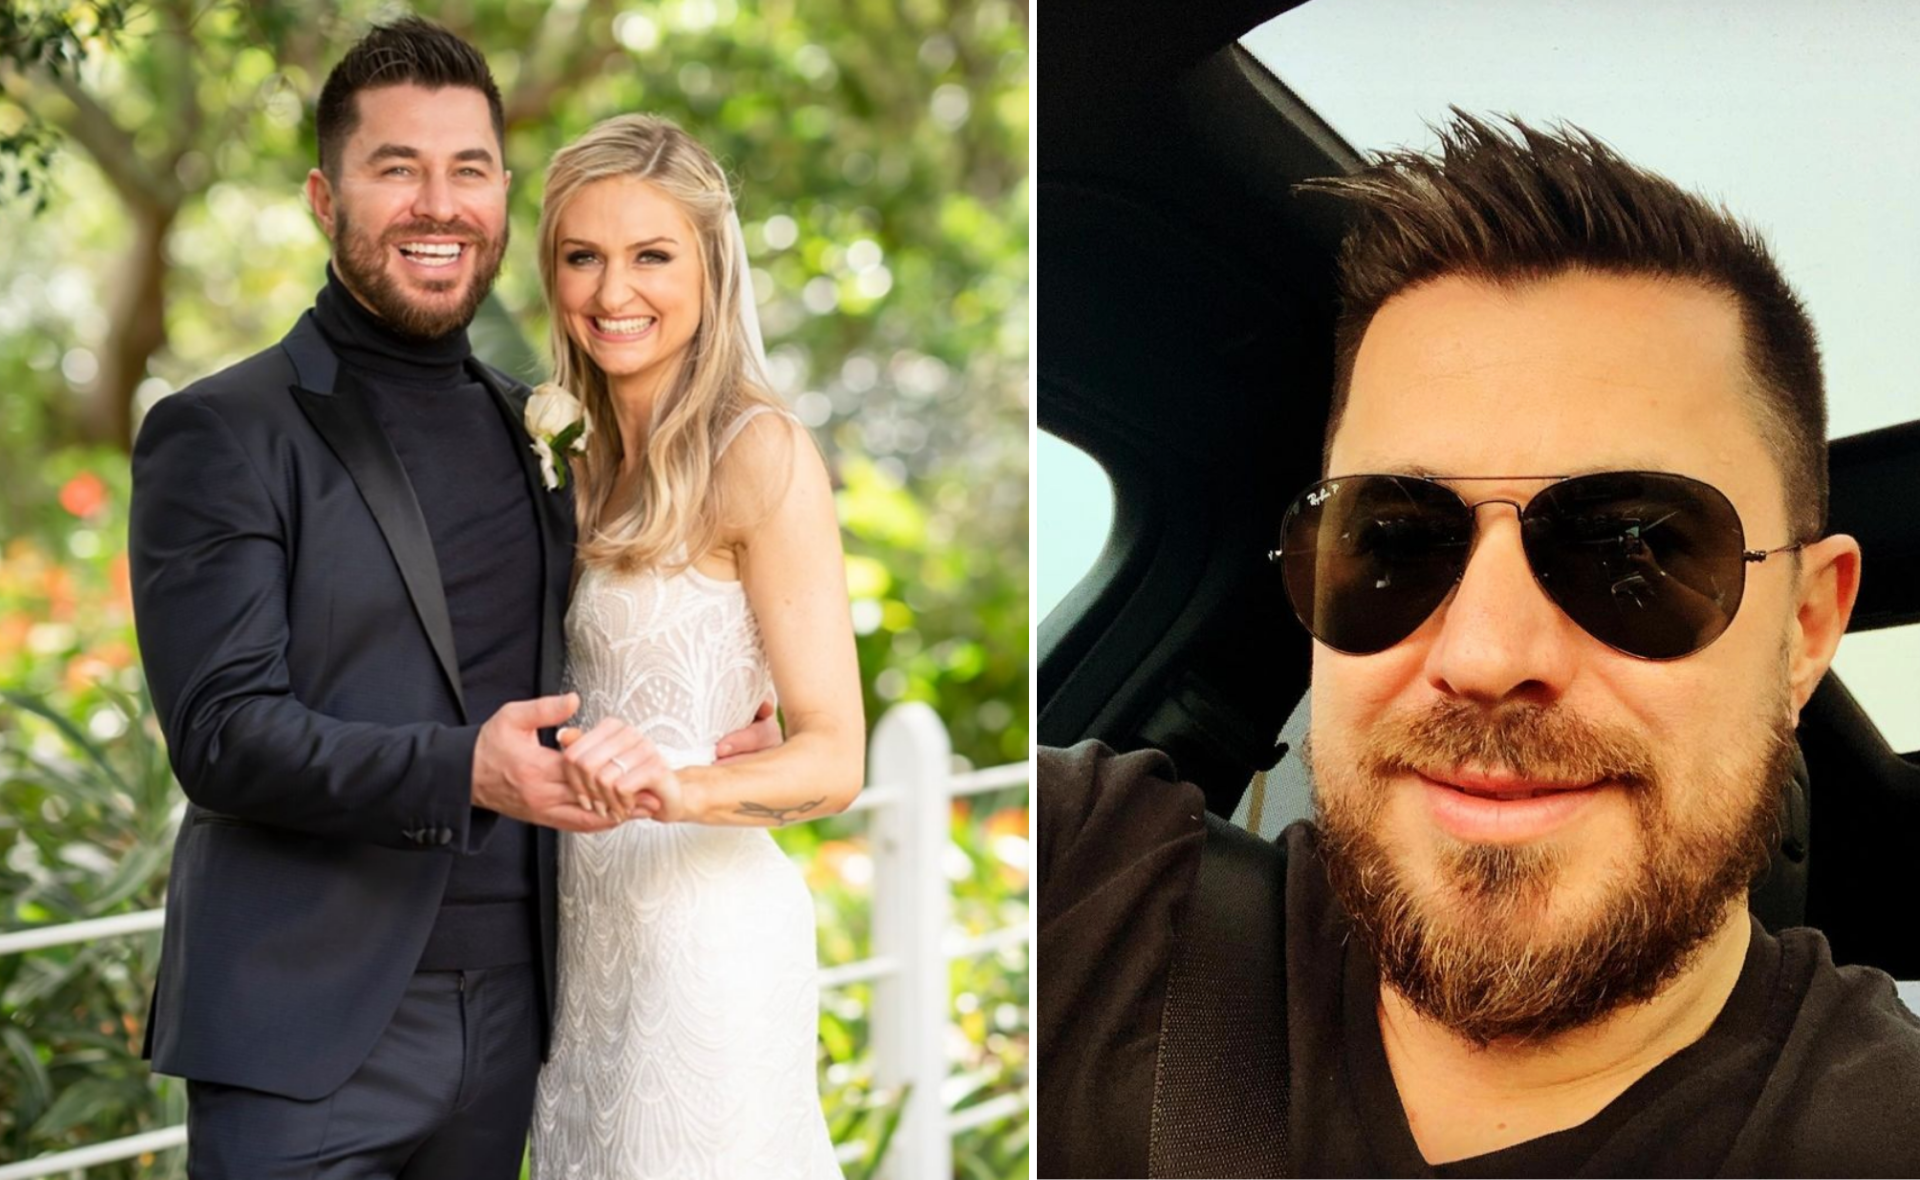 Married At First Sight’s James has been spotted kissing a woman who isn’t his TV bride Joanne